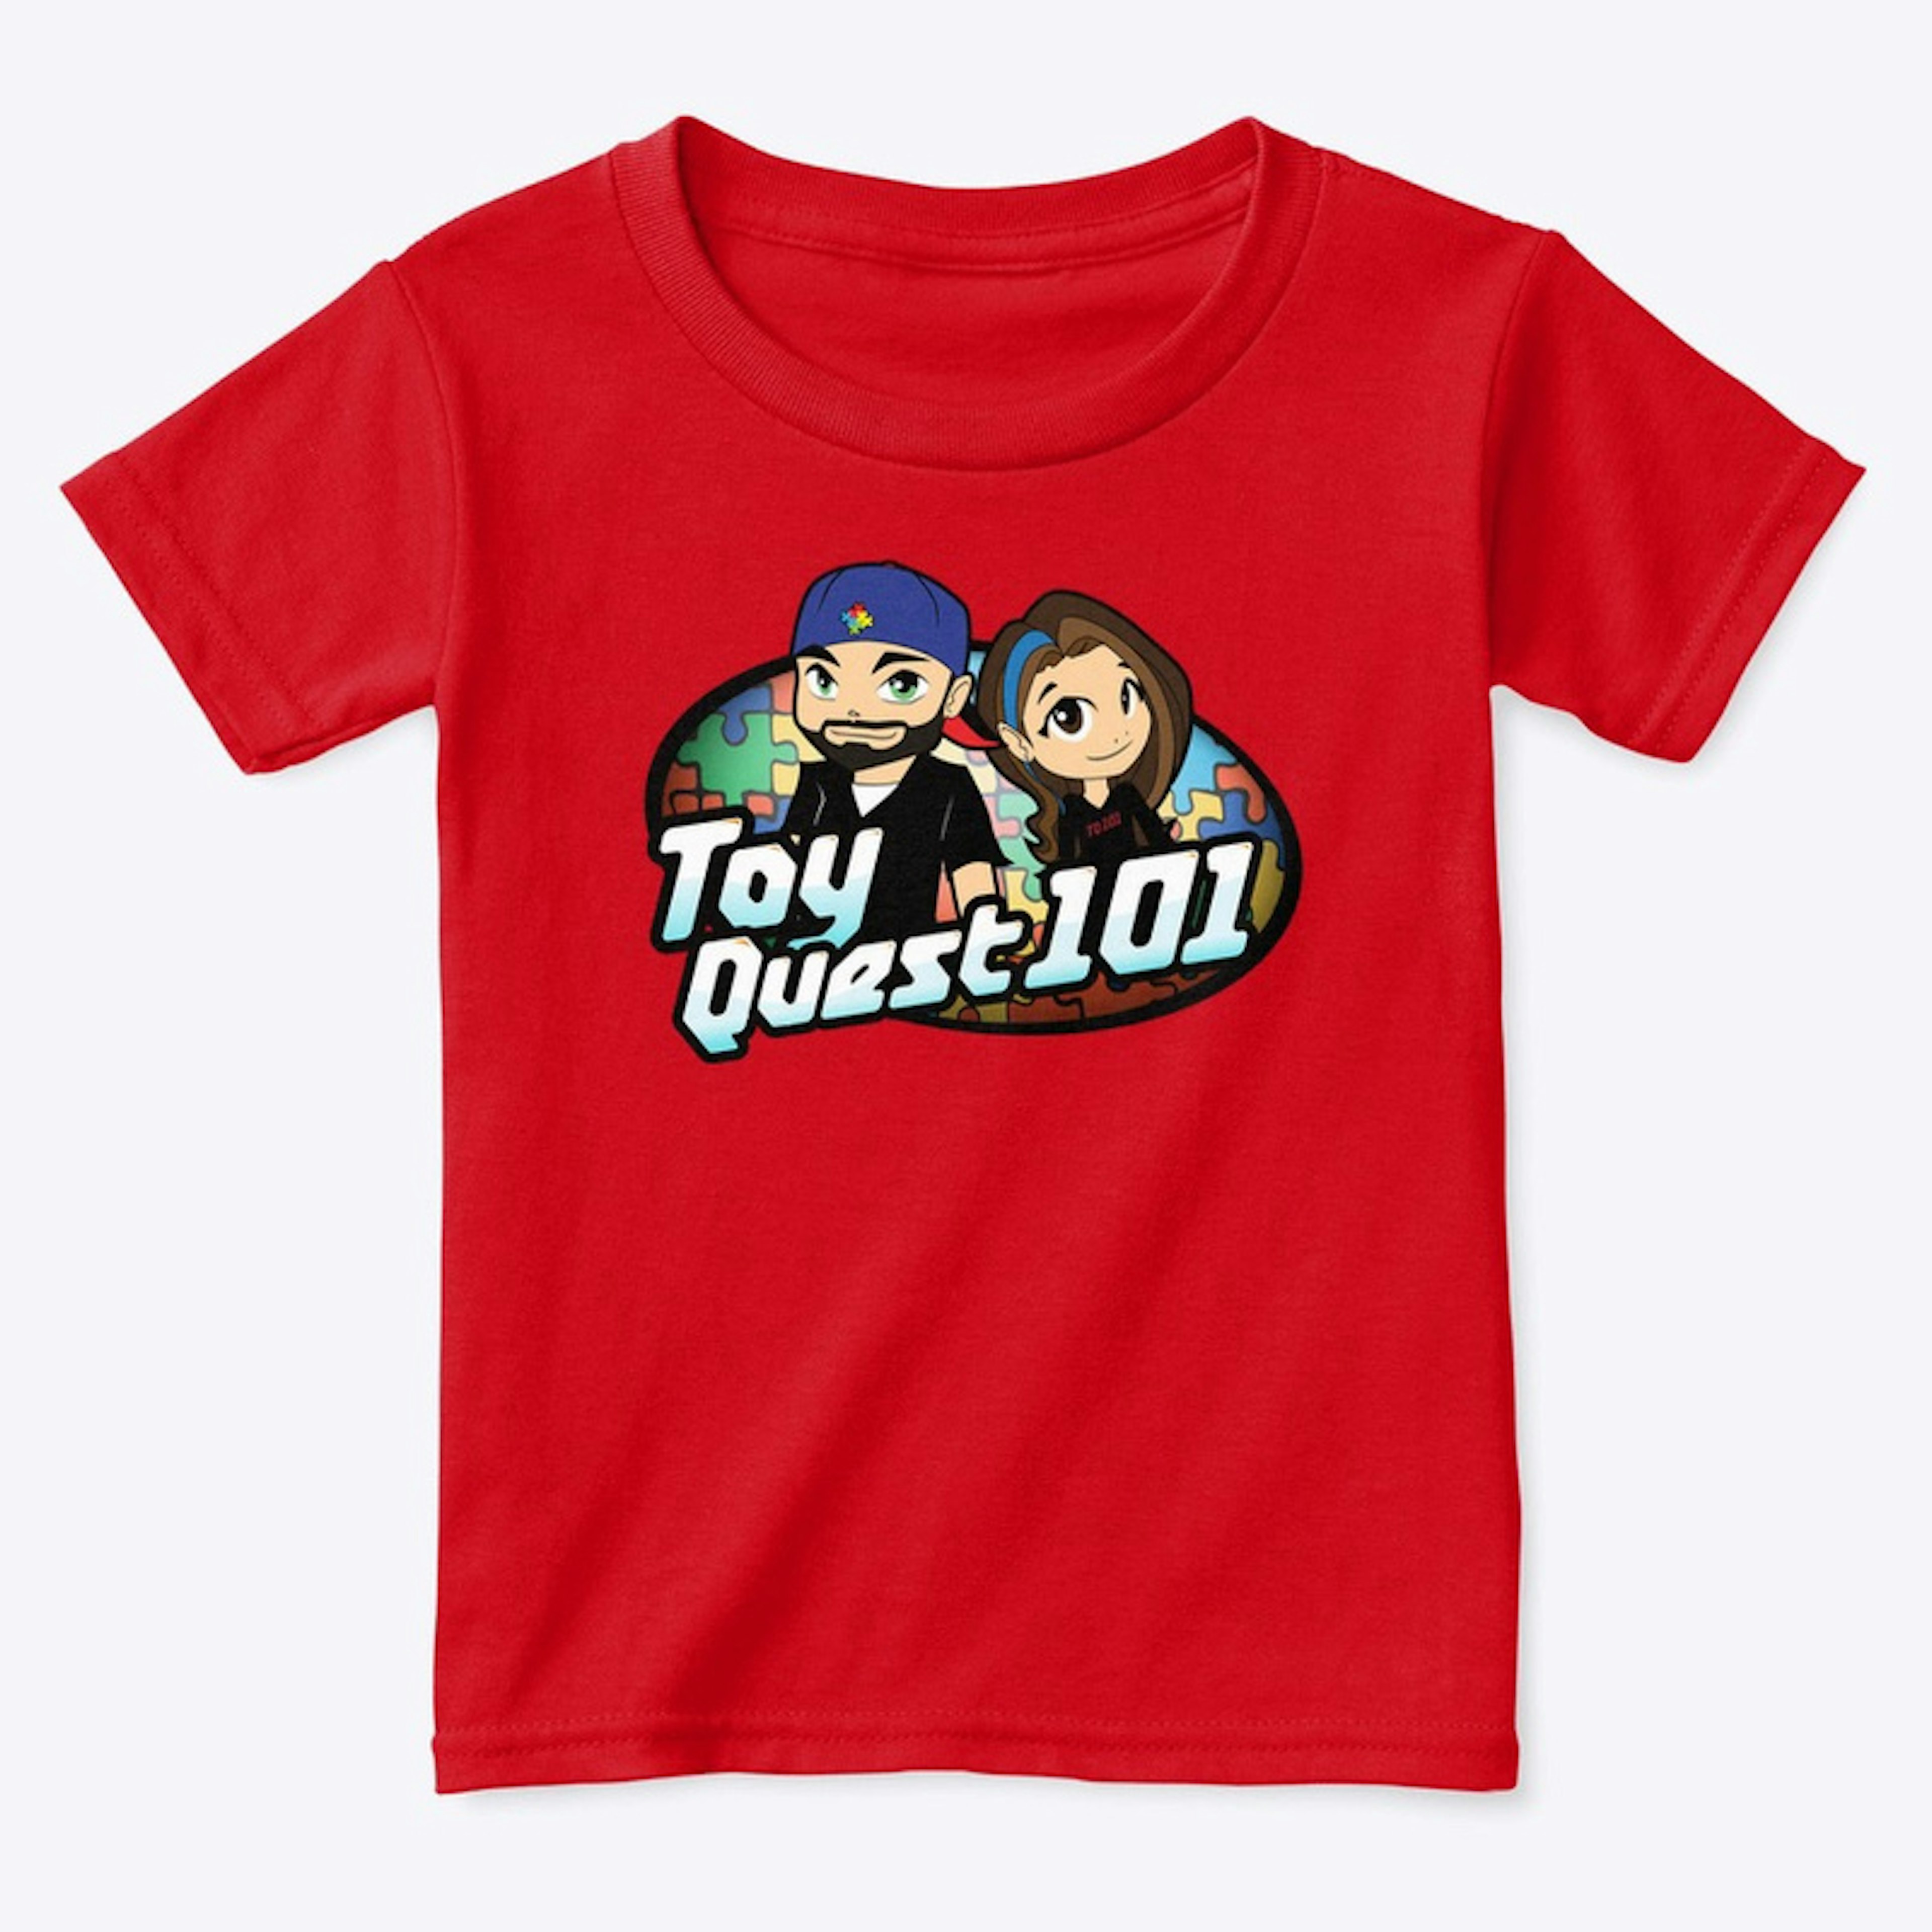 Toyquest101 Toddler T-Shirt